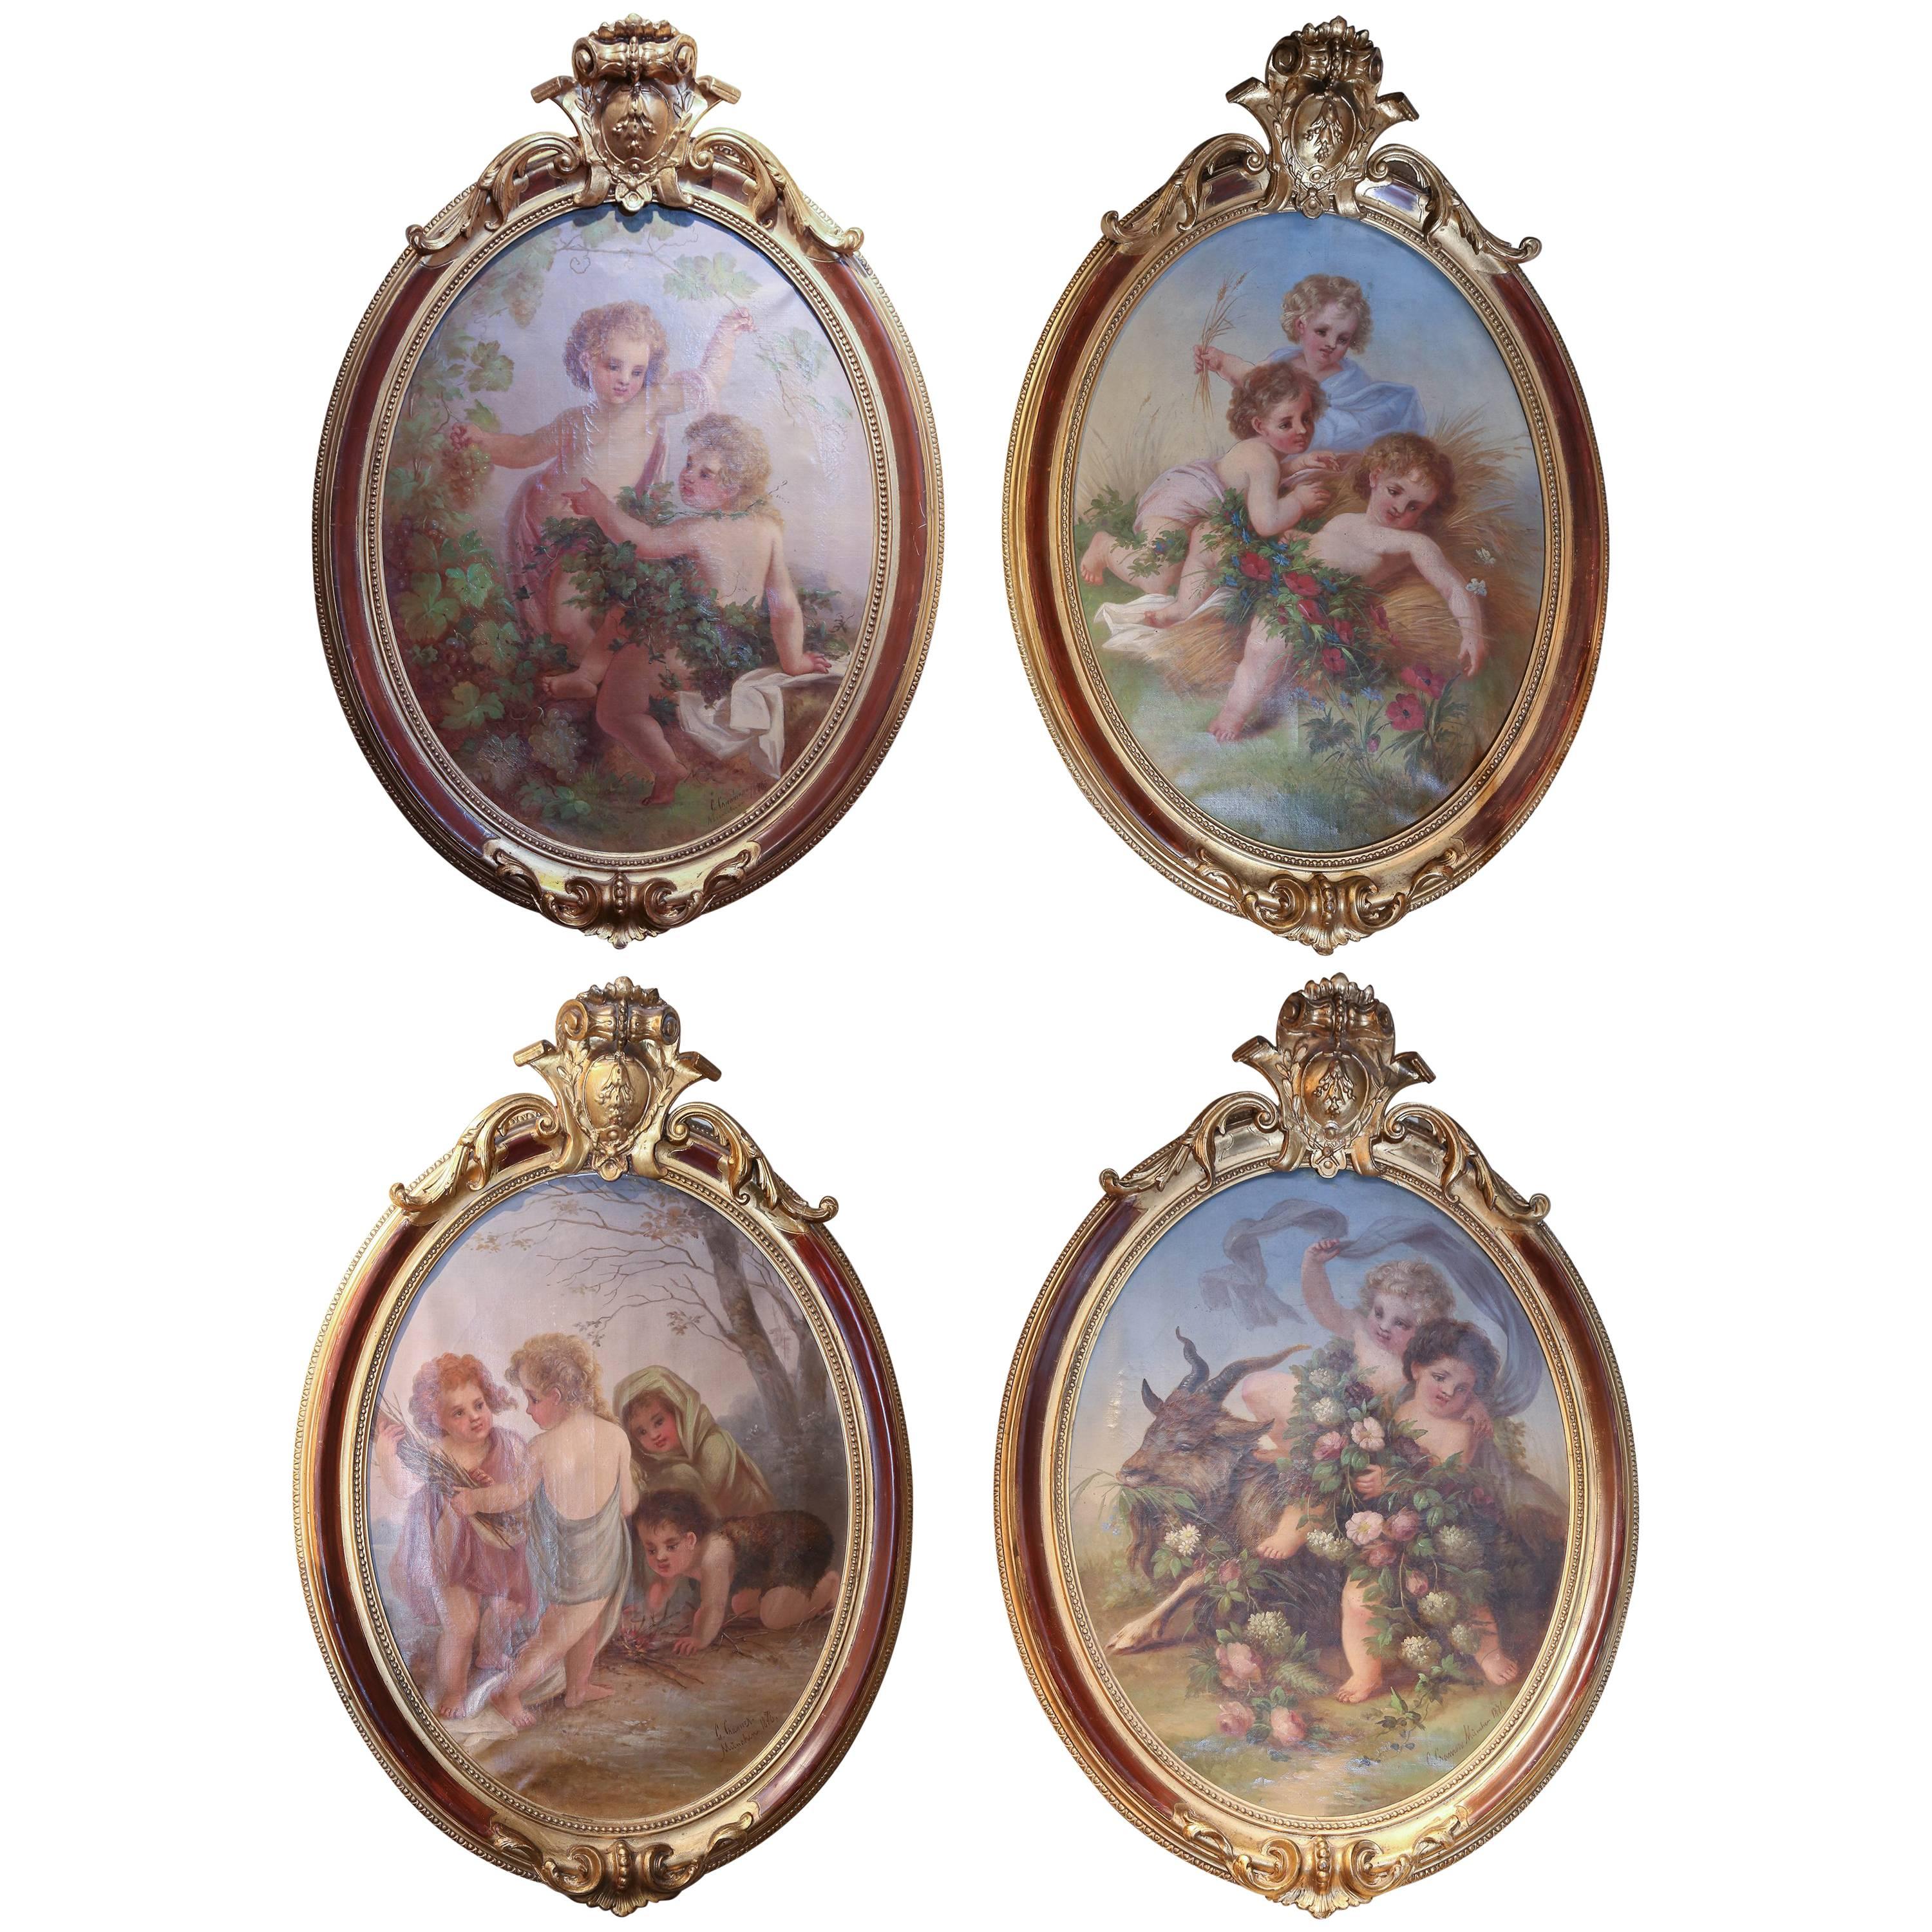 Suite of Four Oval oil Paintings Depicting Cherubs  “The Four Seasons” C. Cramer